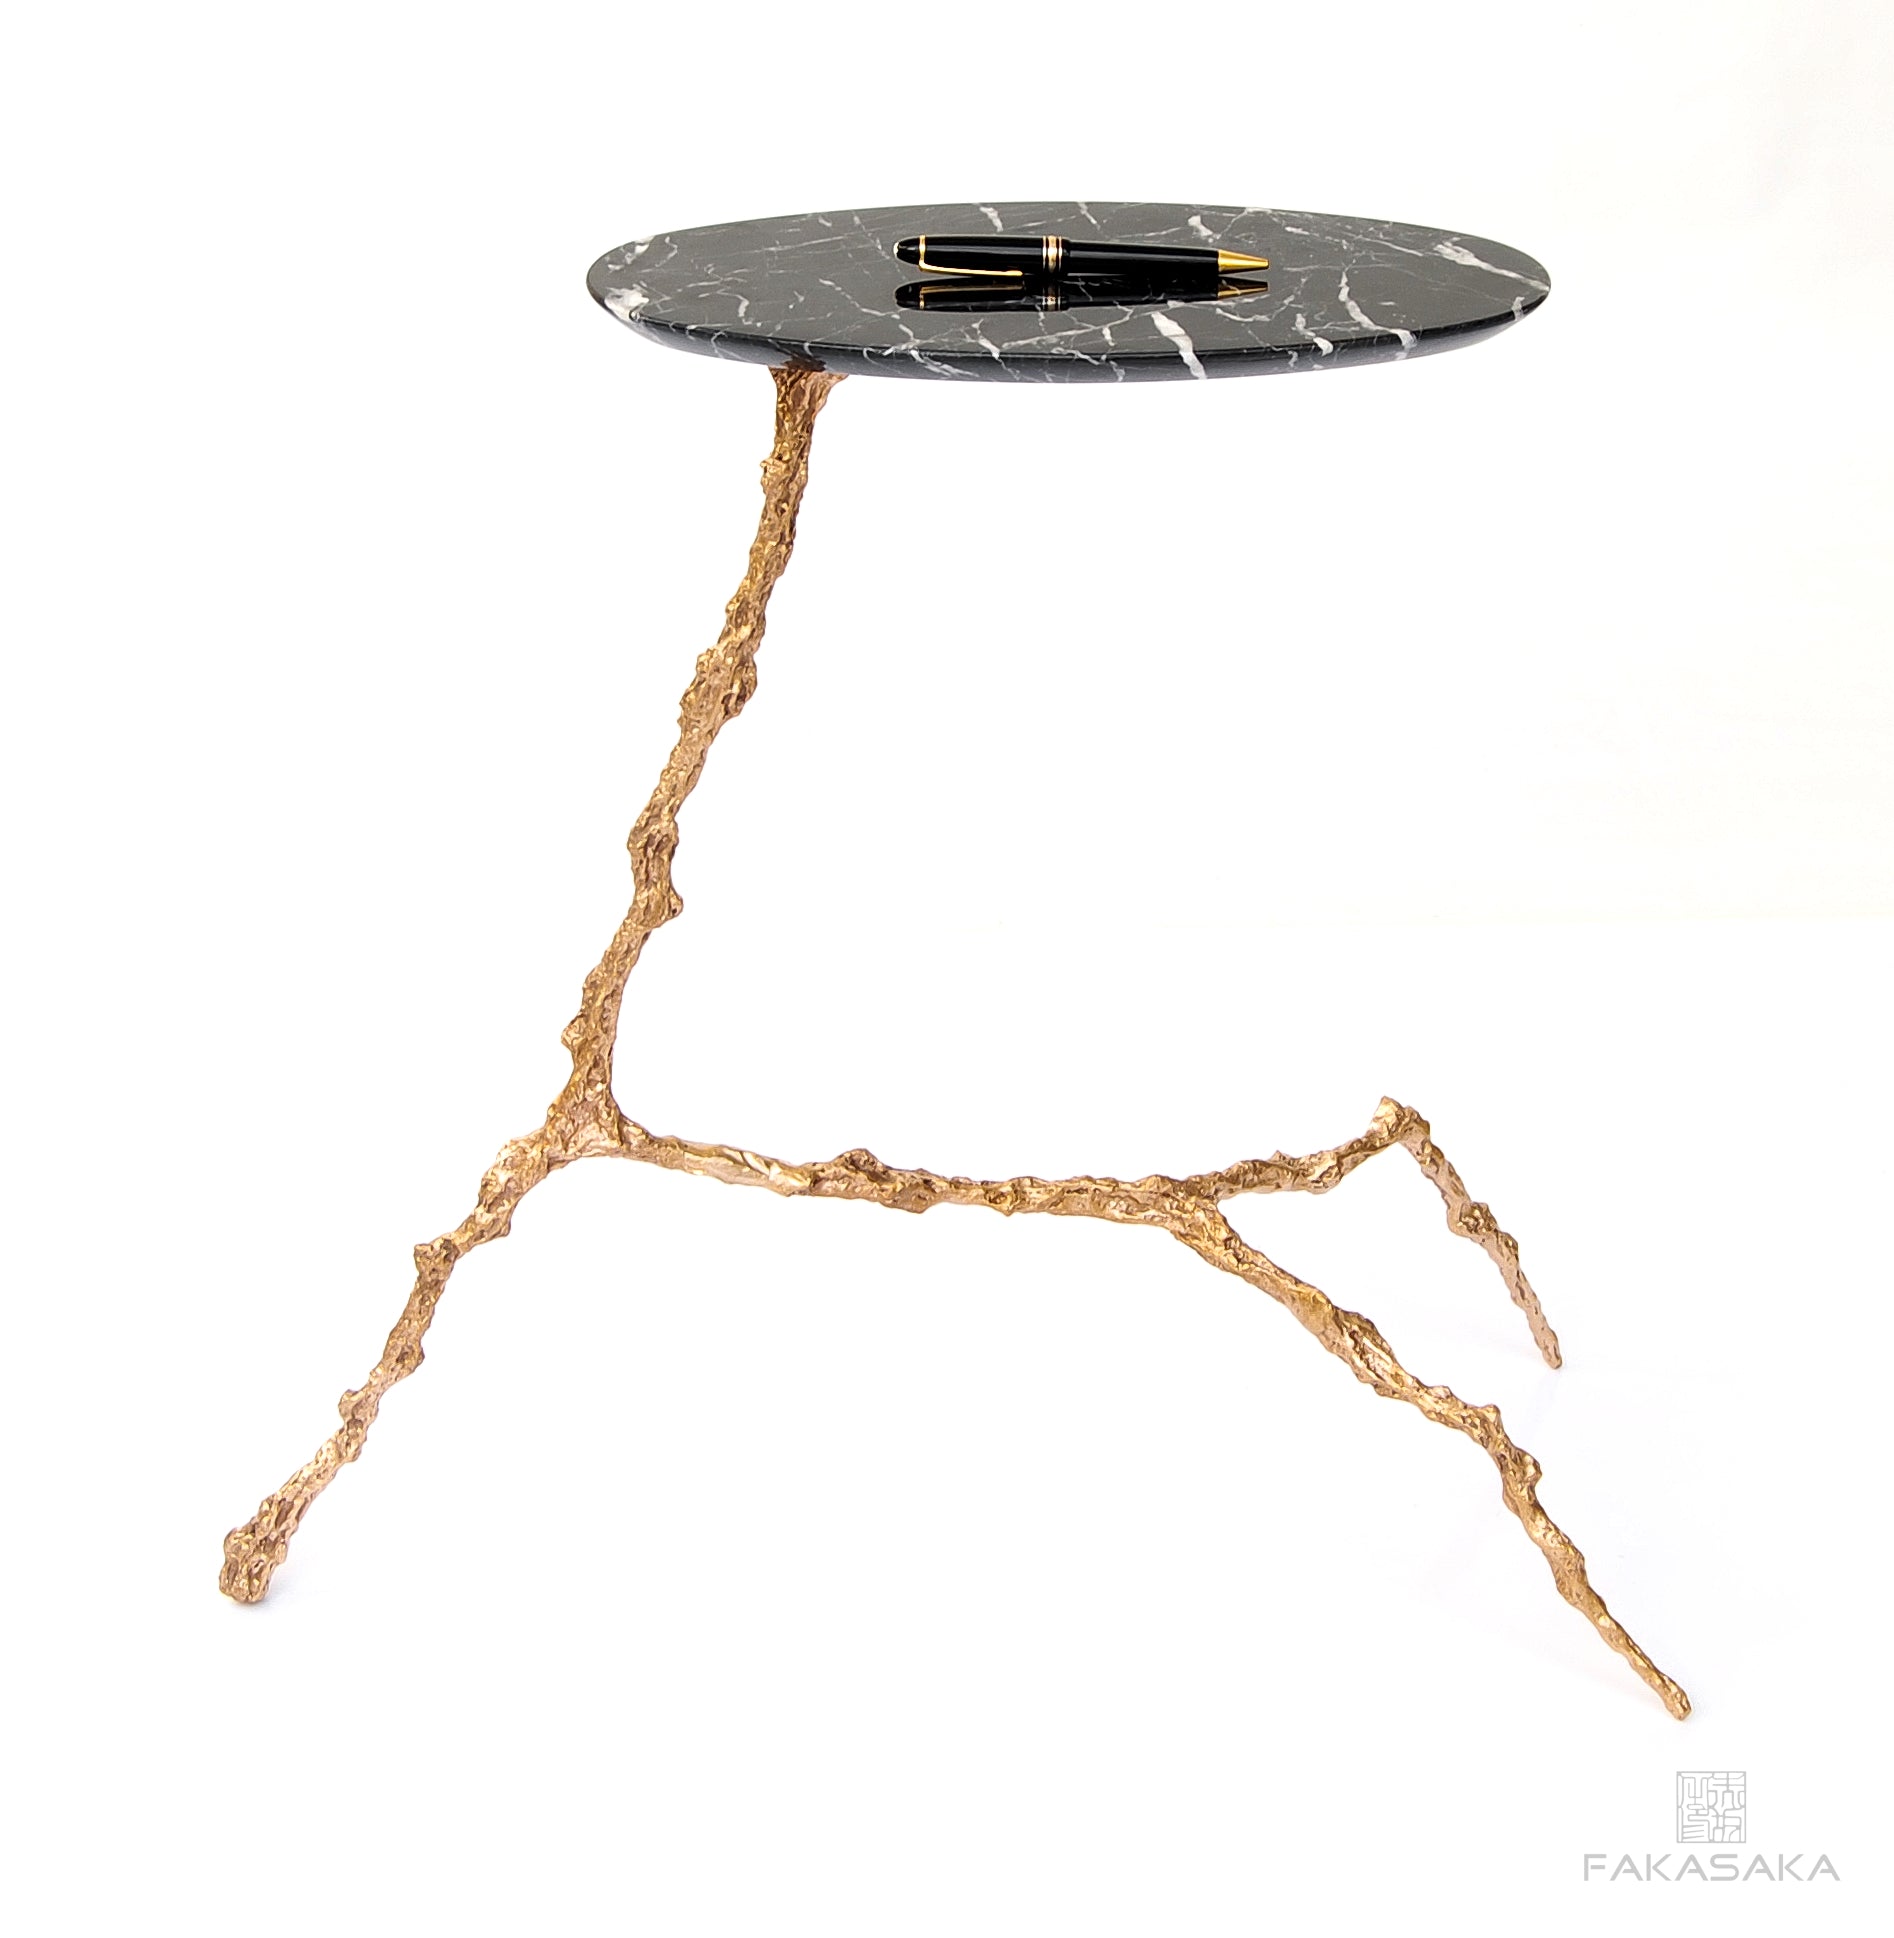 COHEN DRINK TABLE<br><br>NERO MARQUINA MARBLE<br>POLISHED BRONZE